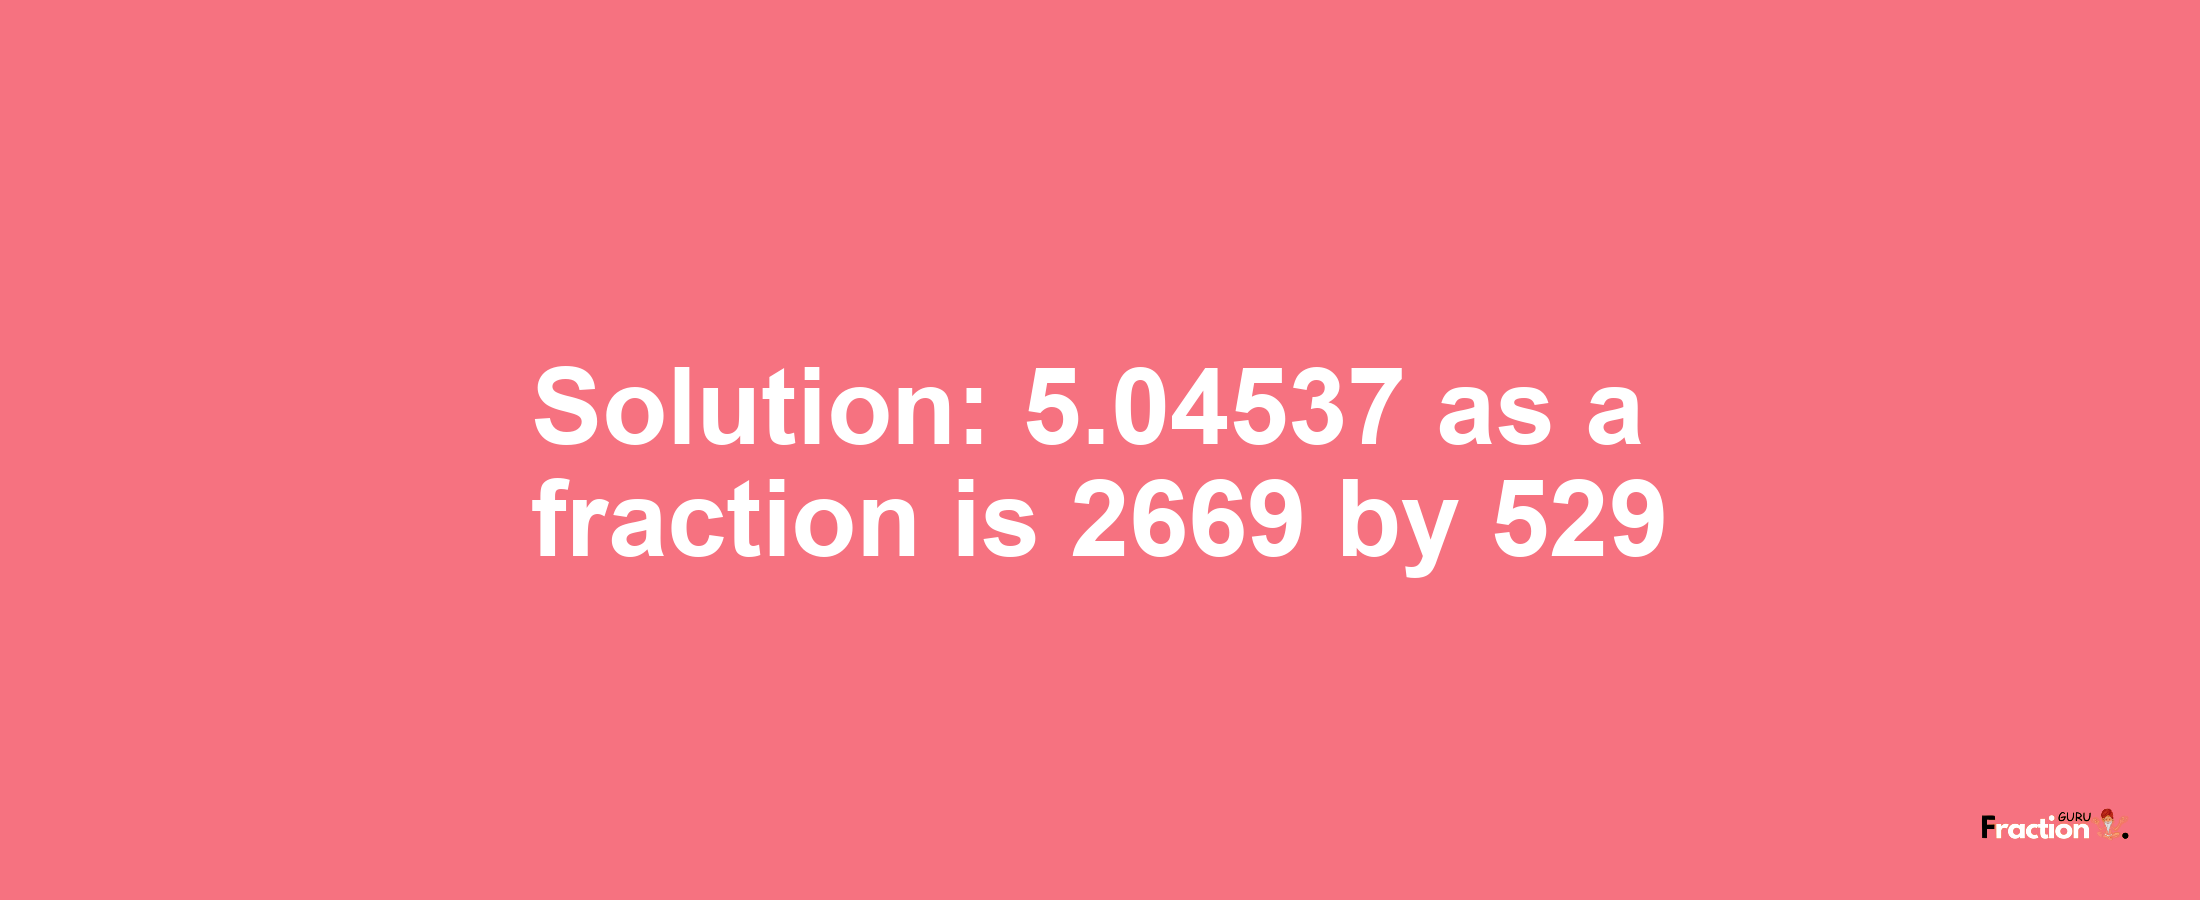 Solution:5.04537 as a fraction is 2669/529